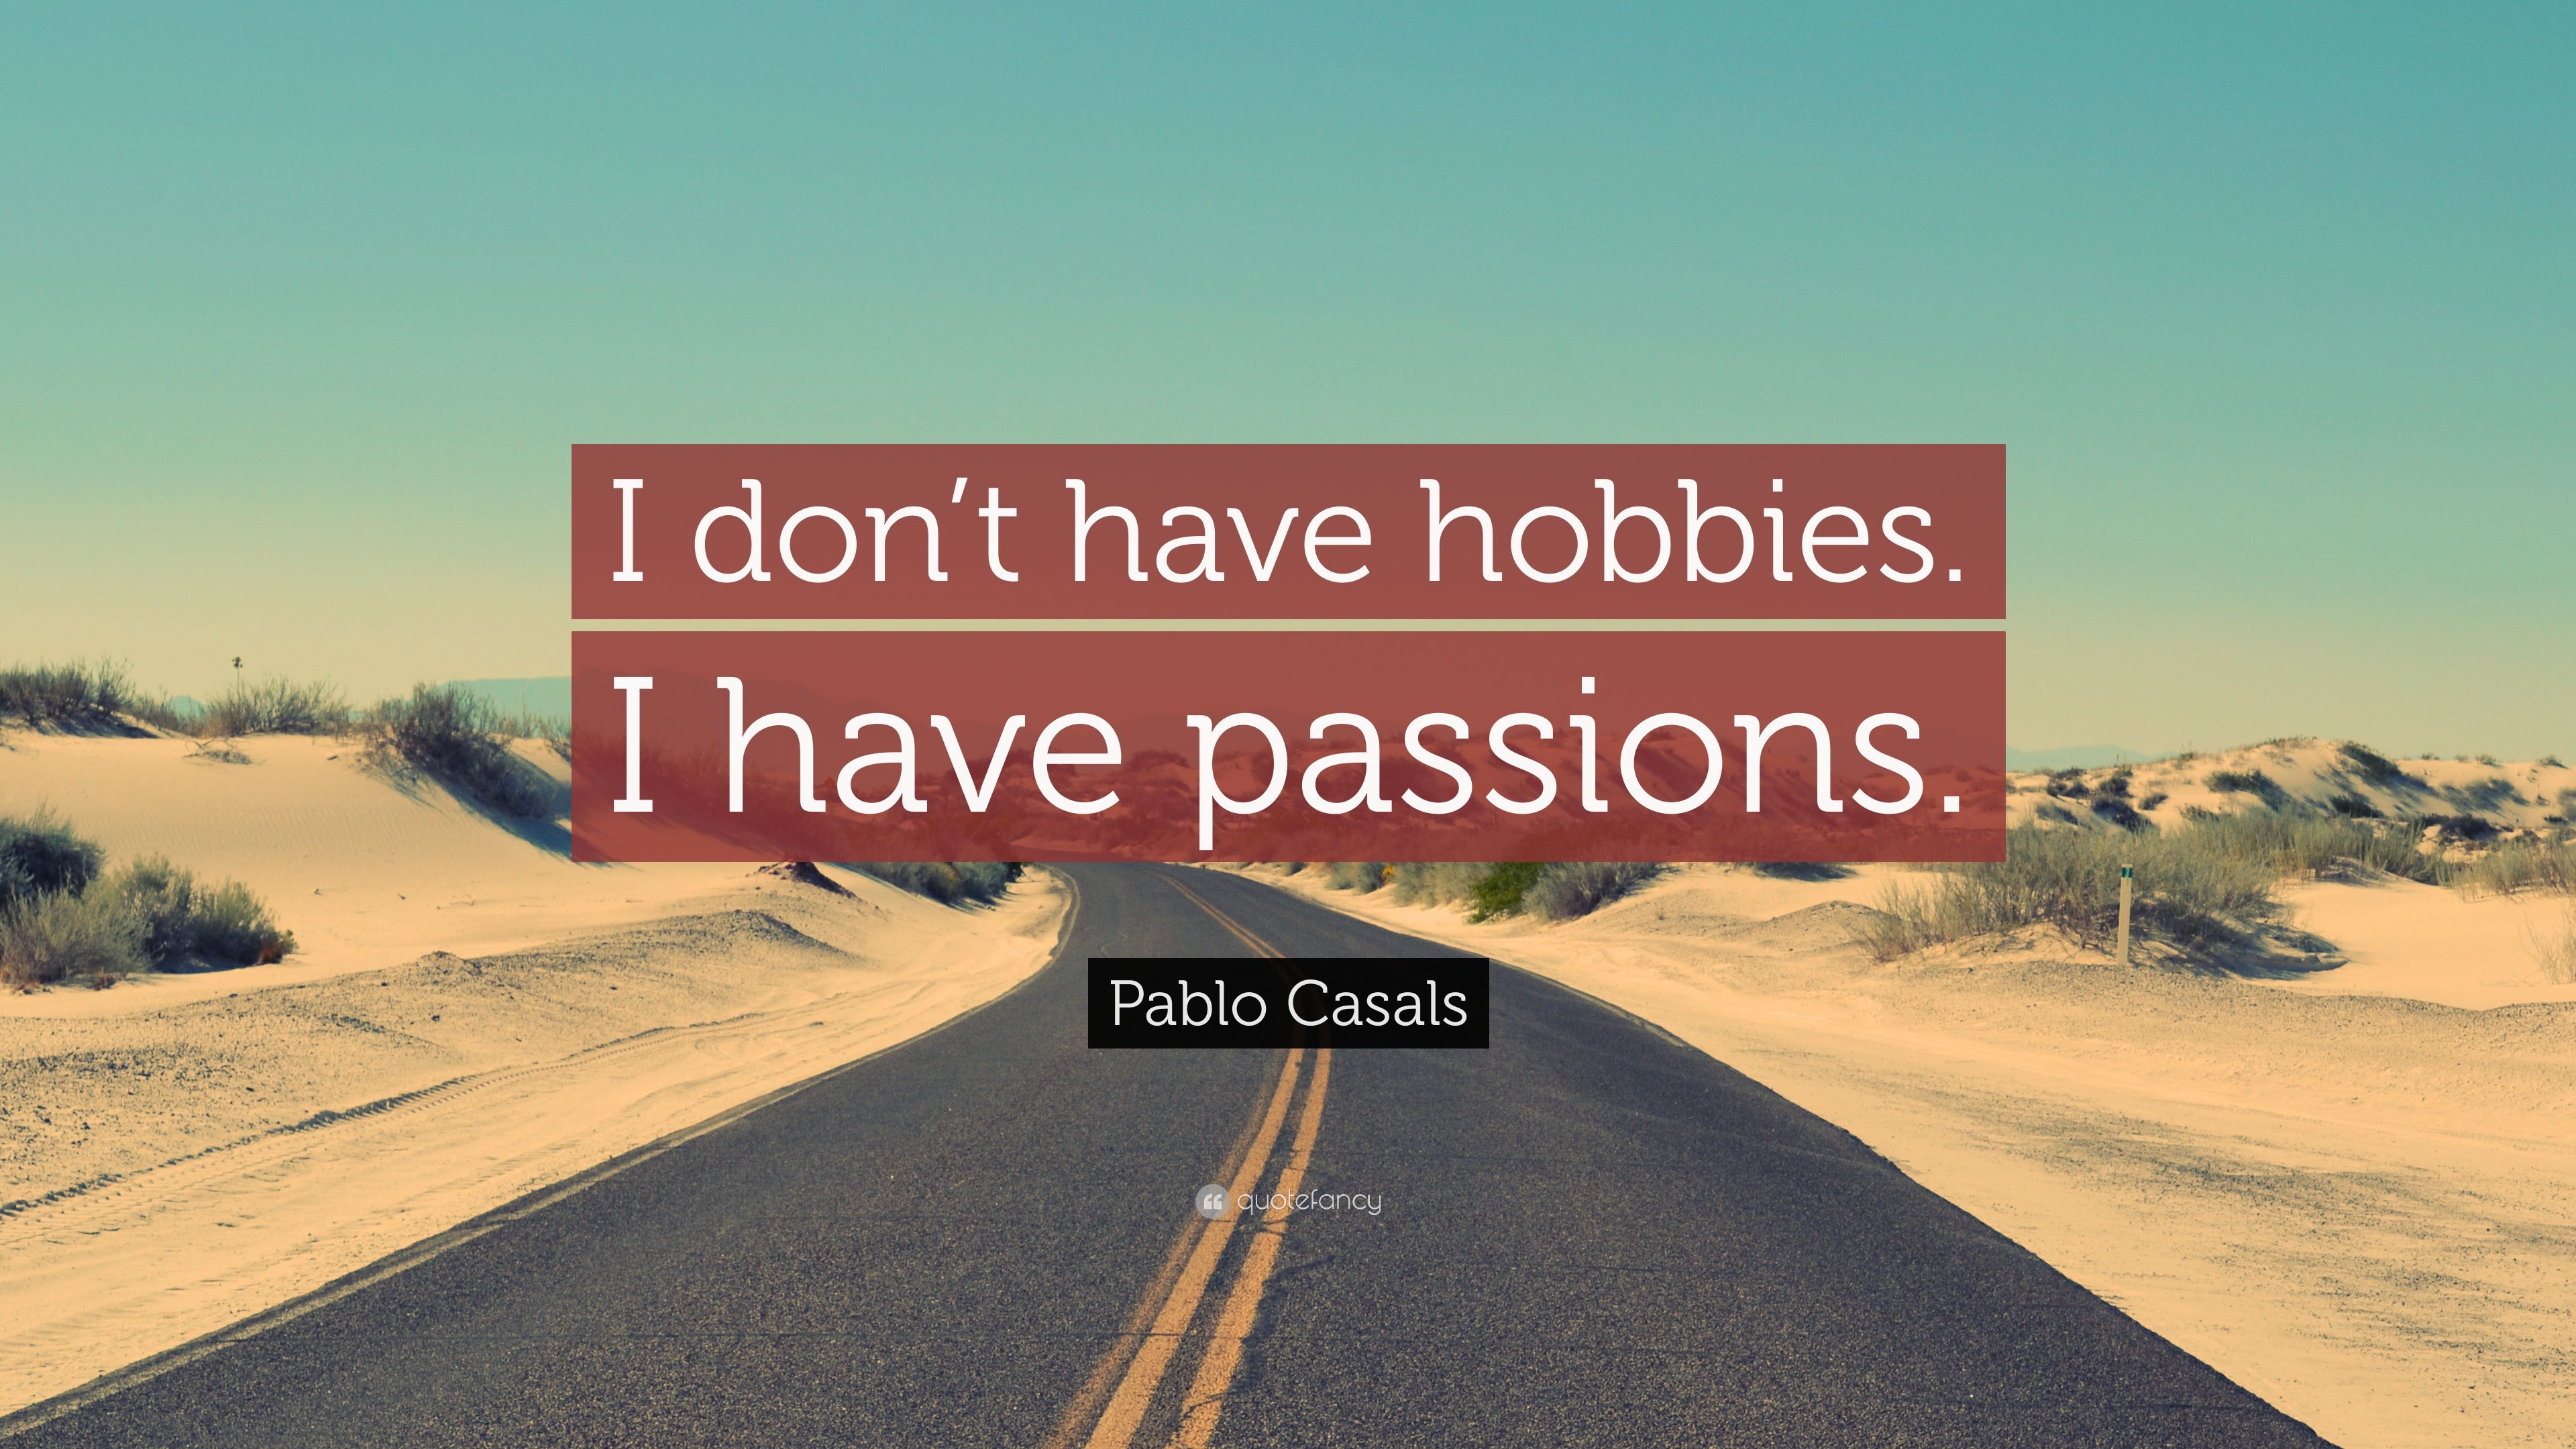 Pablo Casals Quote: “I don't have hobbies. I have passions.” 12